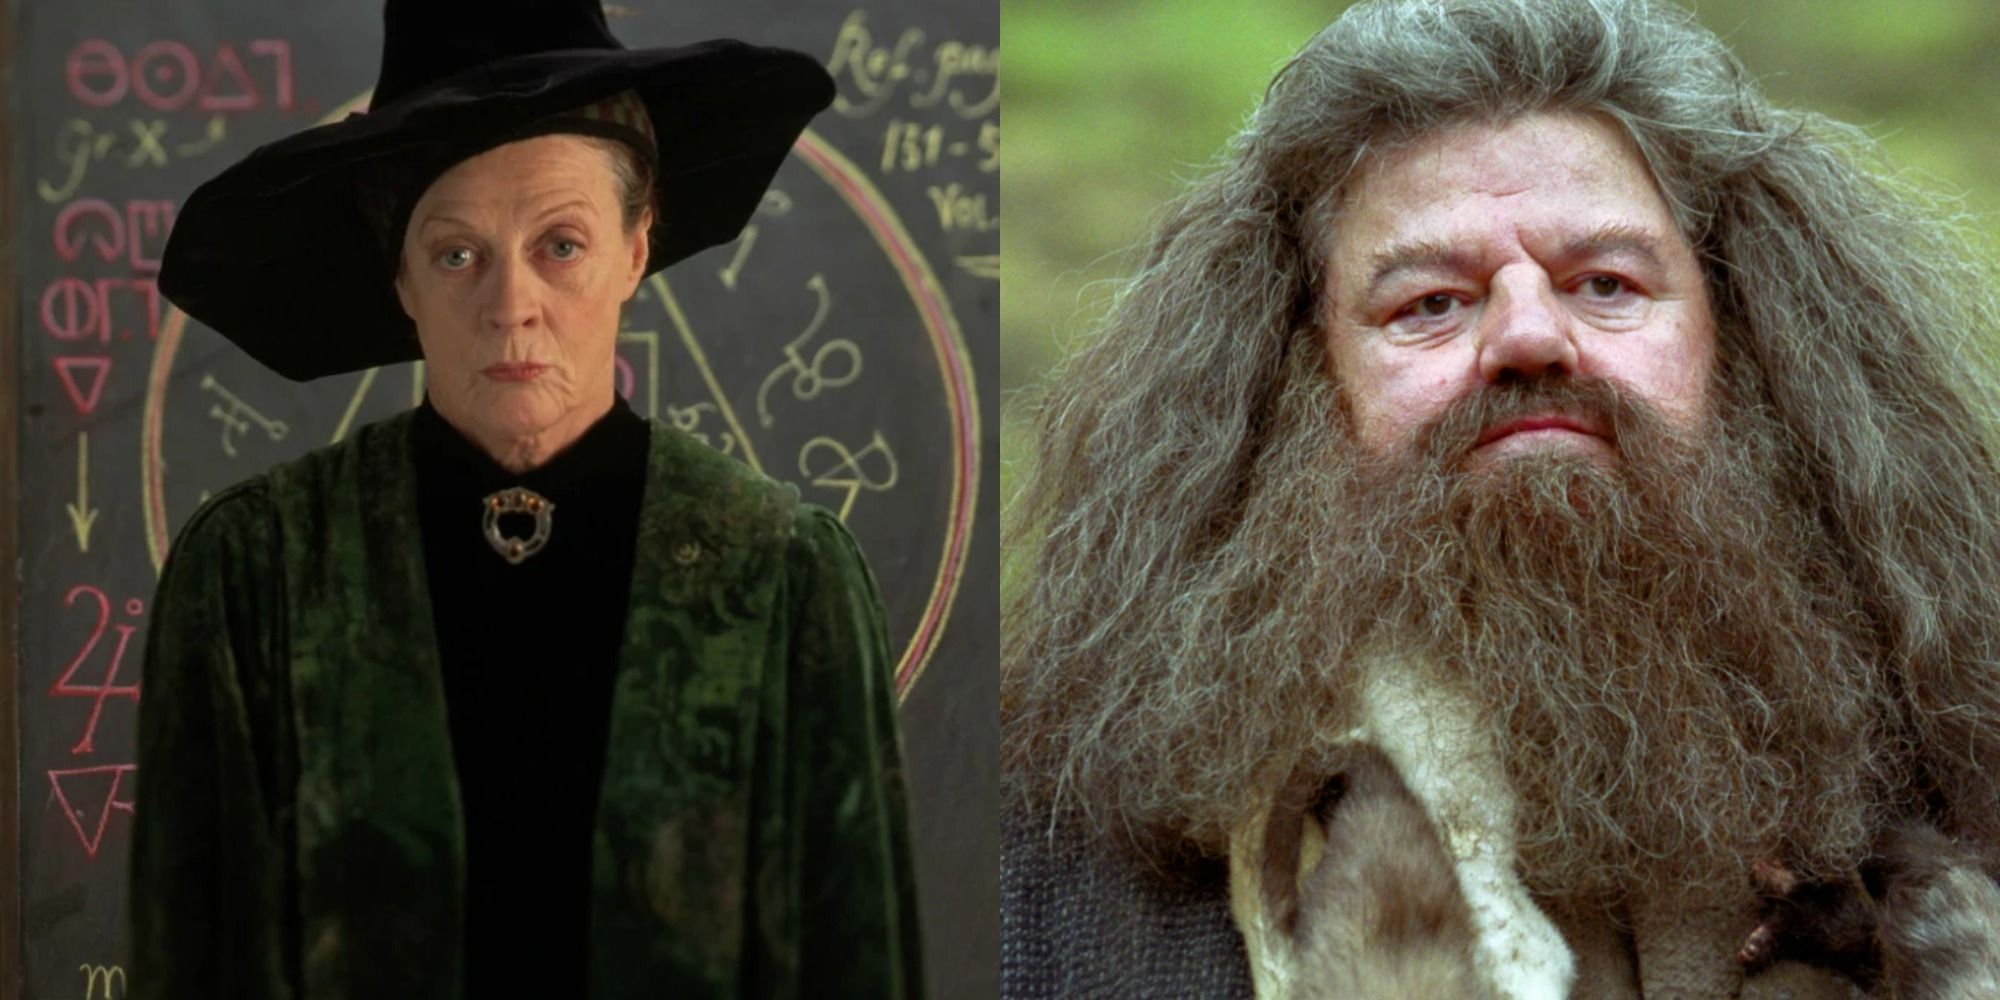 Split image showing McGonagall and Hagrid in Harry Potter.